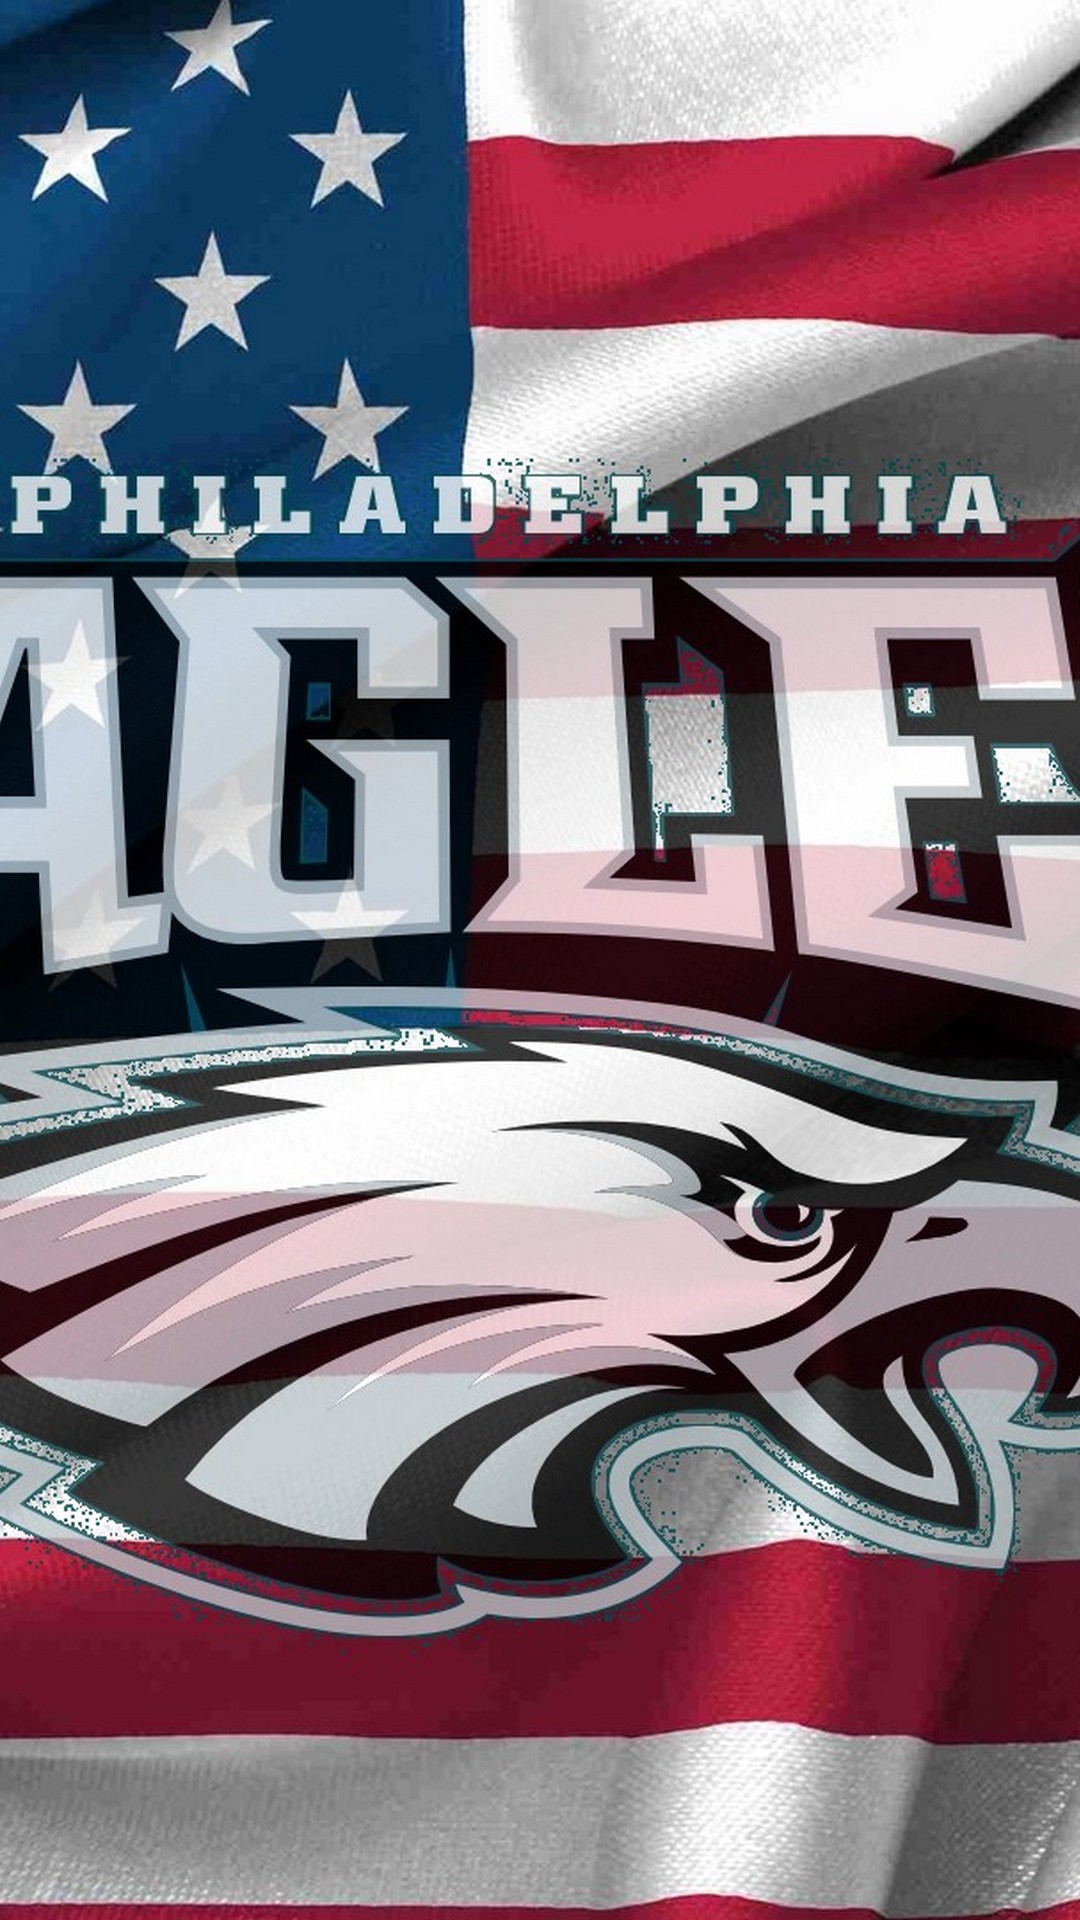 Phila Eagles Wallpaper iPhone HD With Resolution 1080X1920 pixel. You can make this wallpaper for your Mac or Windows Desktop Background, iPhone, Android or Tablet and another Smartphone device for free